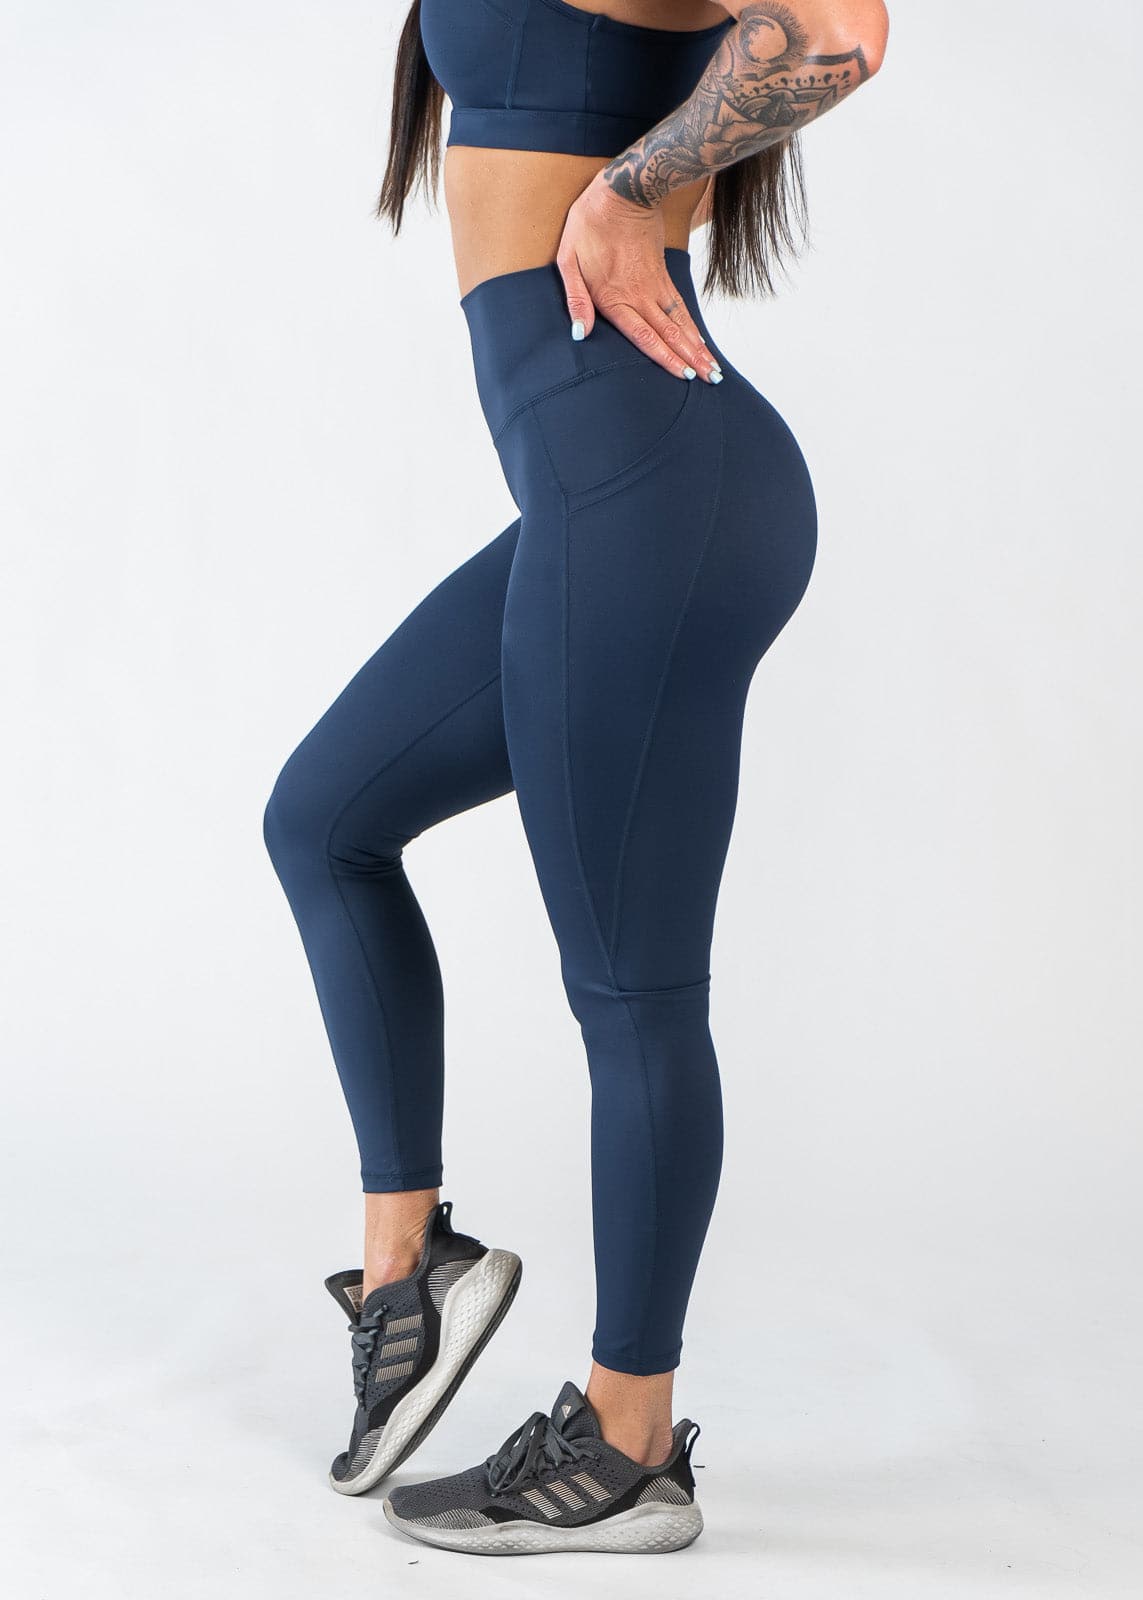 Chest Down Side View One Leg Up Wearing Empowered Leggings With Pockets | Blue